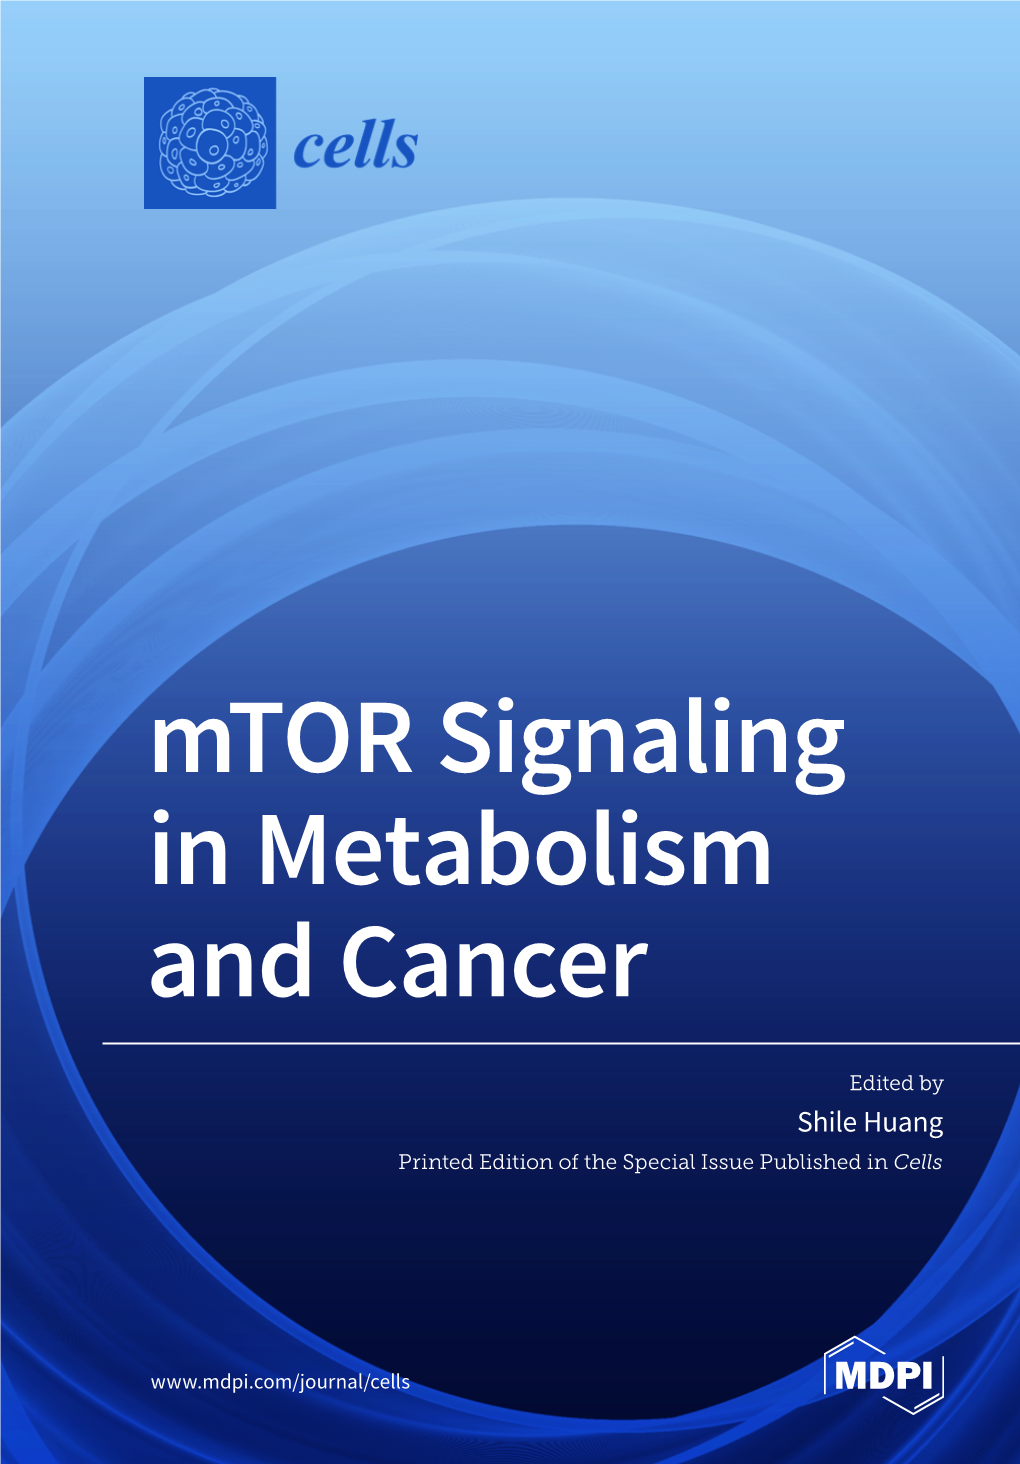 Mtor Signaling in Metabolism and Cancer